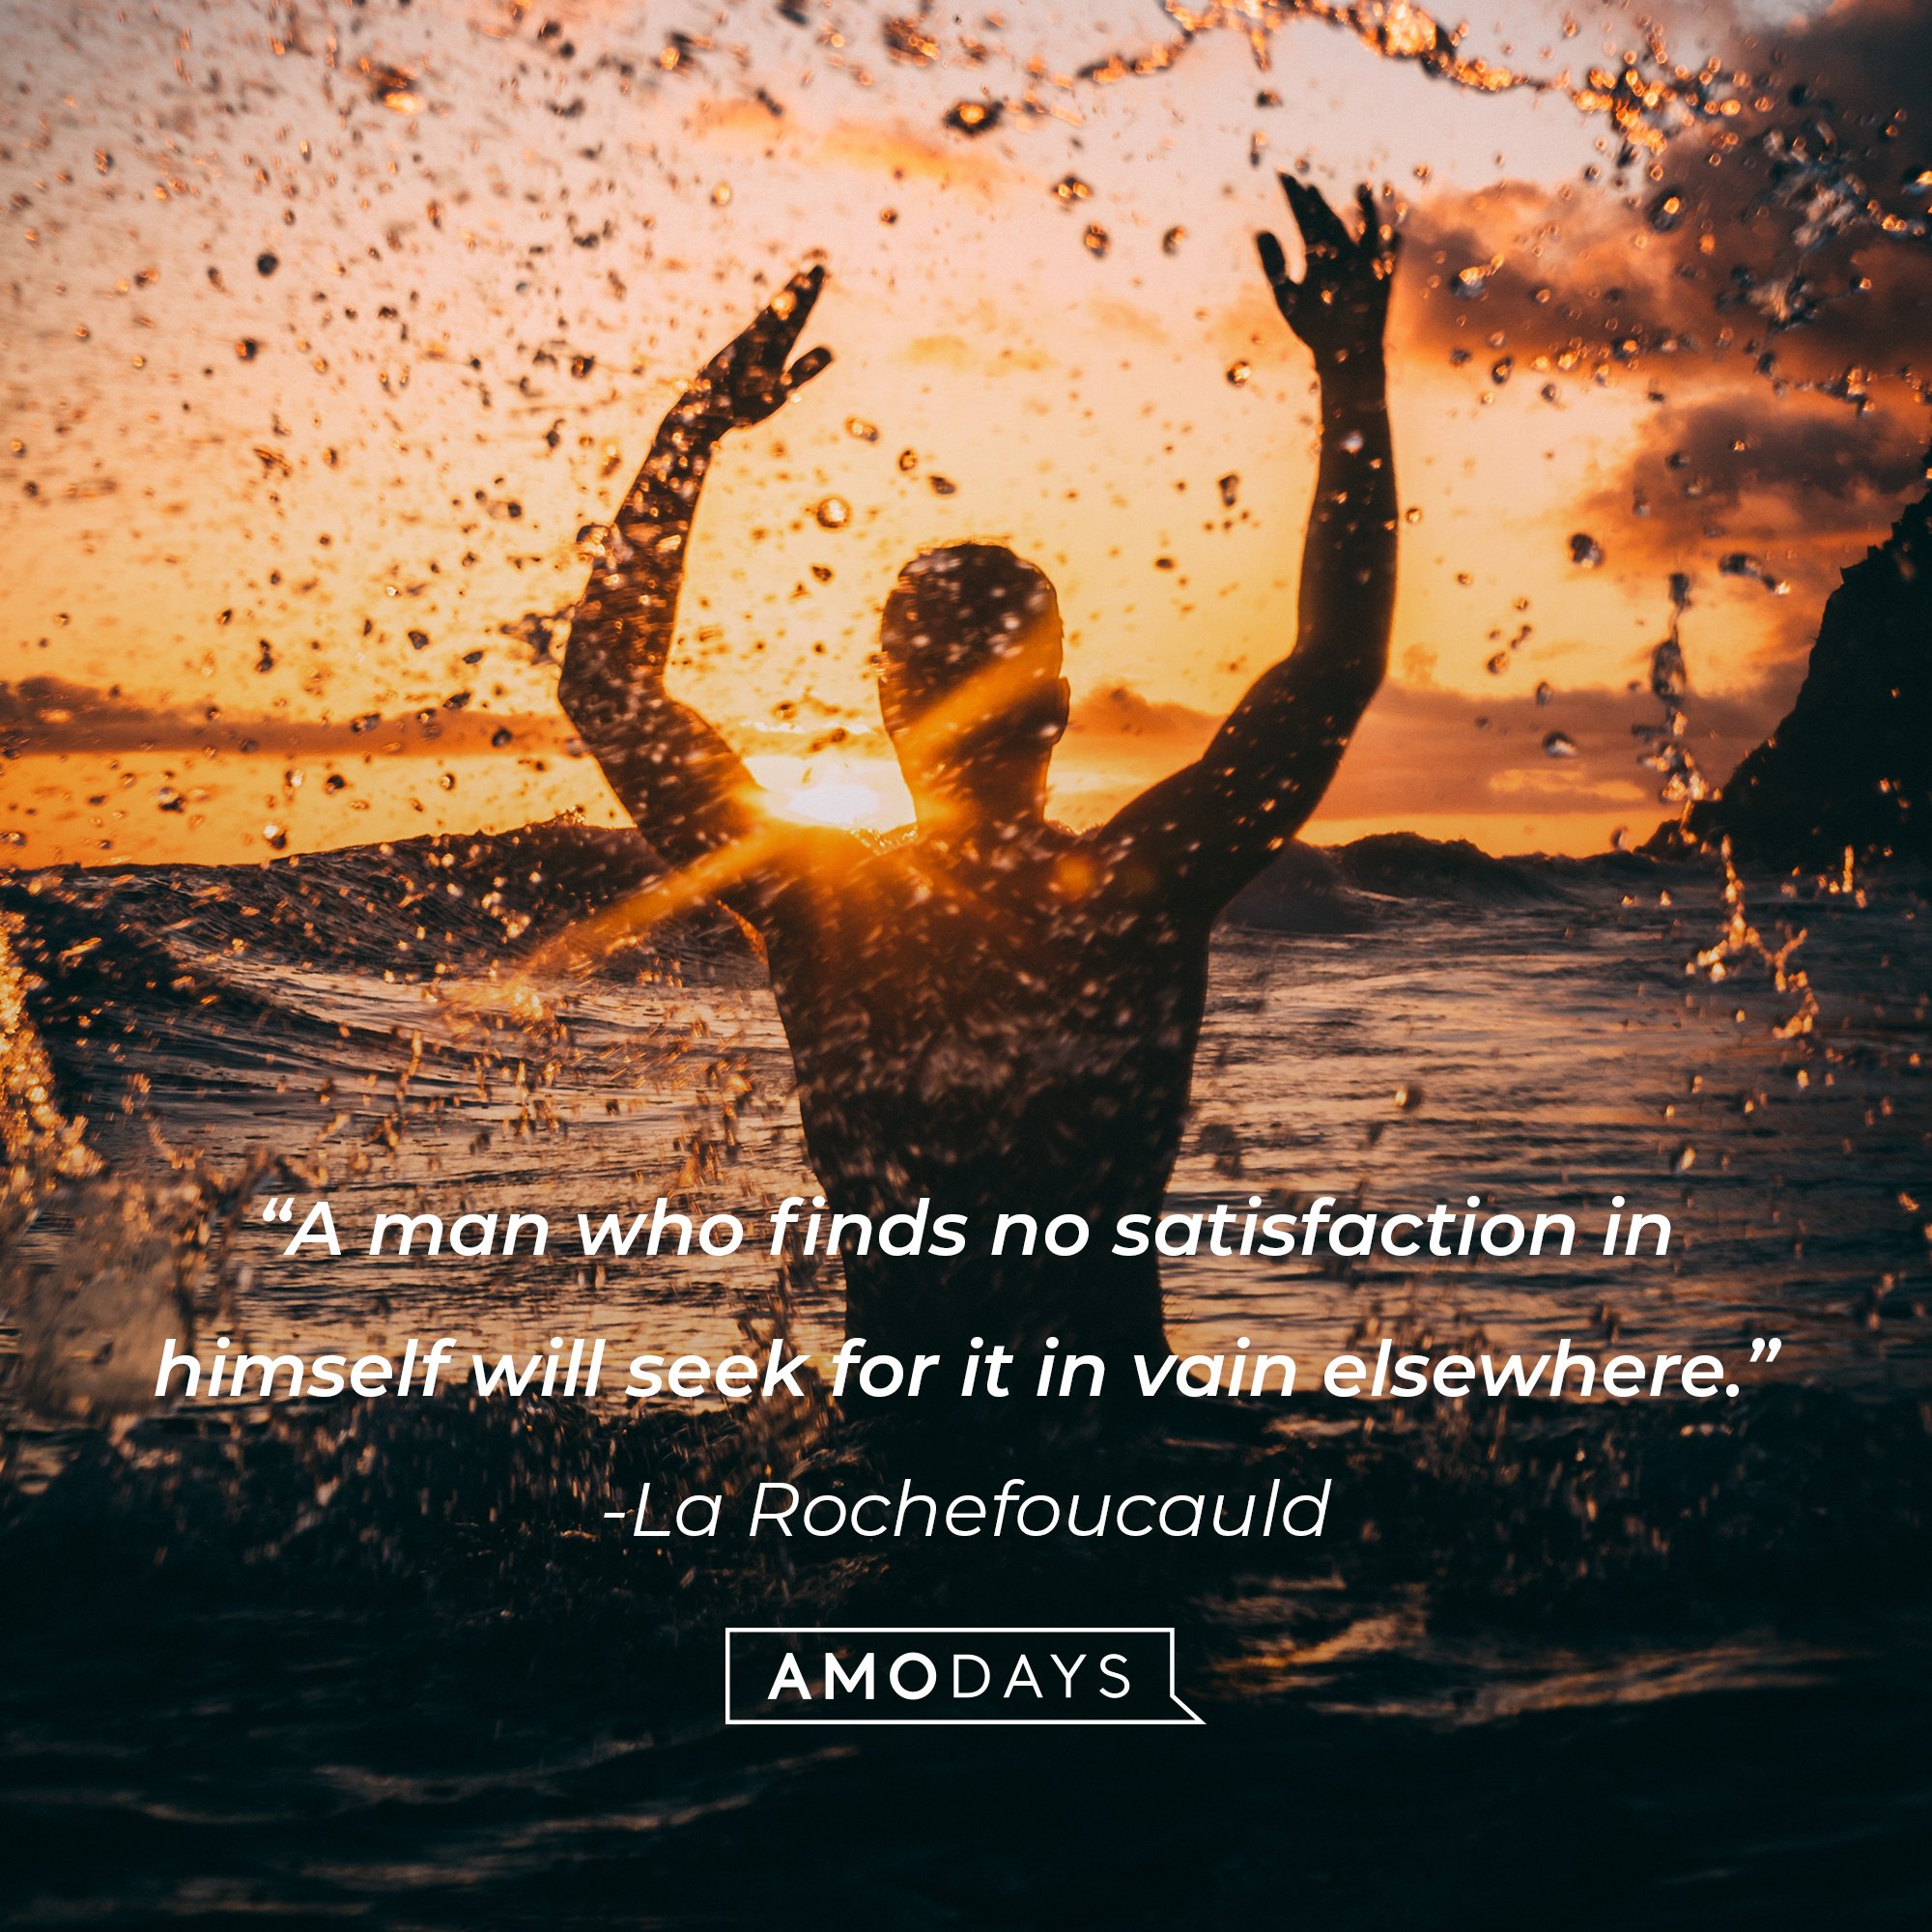  La Rochefoucauld's quote: “A man who finds no satisfaction in himself will seek for it in vain elsewhere.” | Image: AmoDays